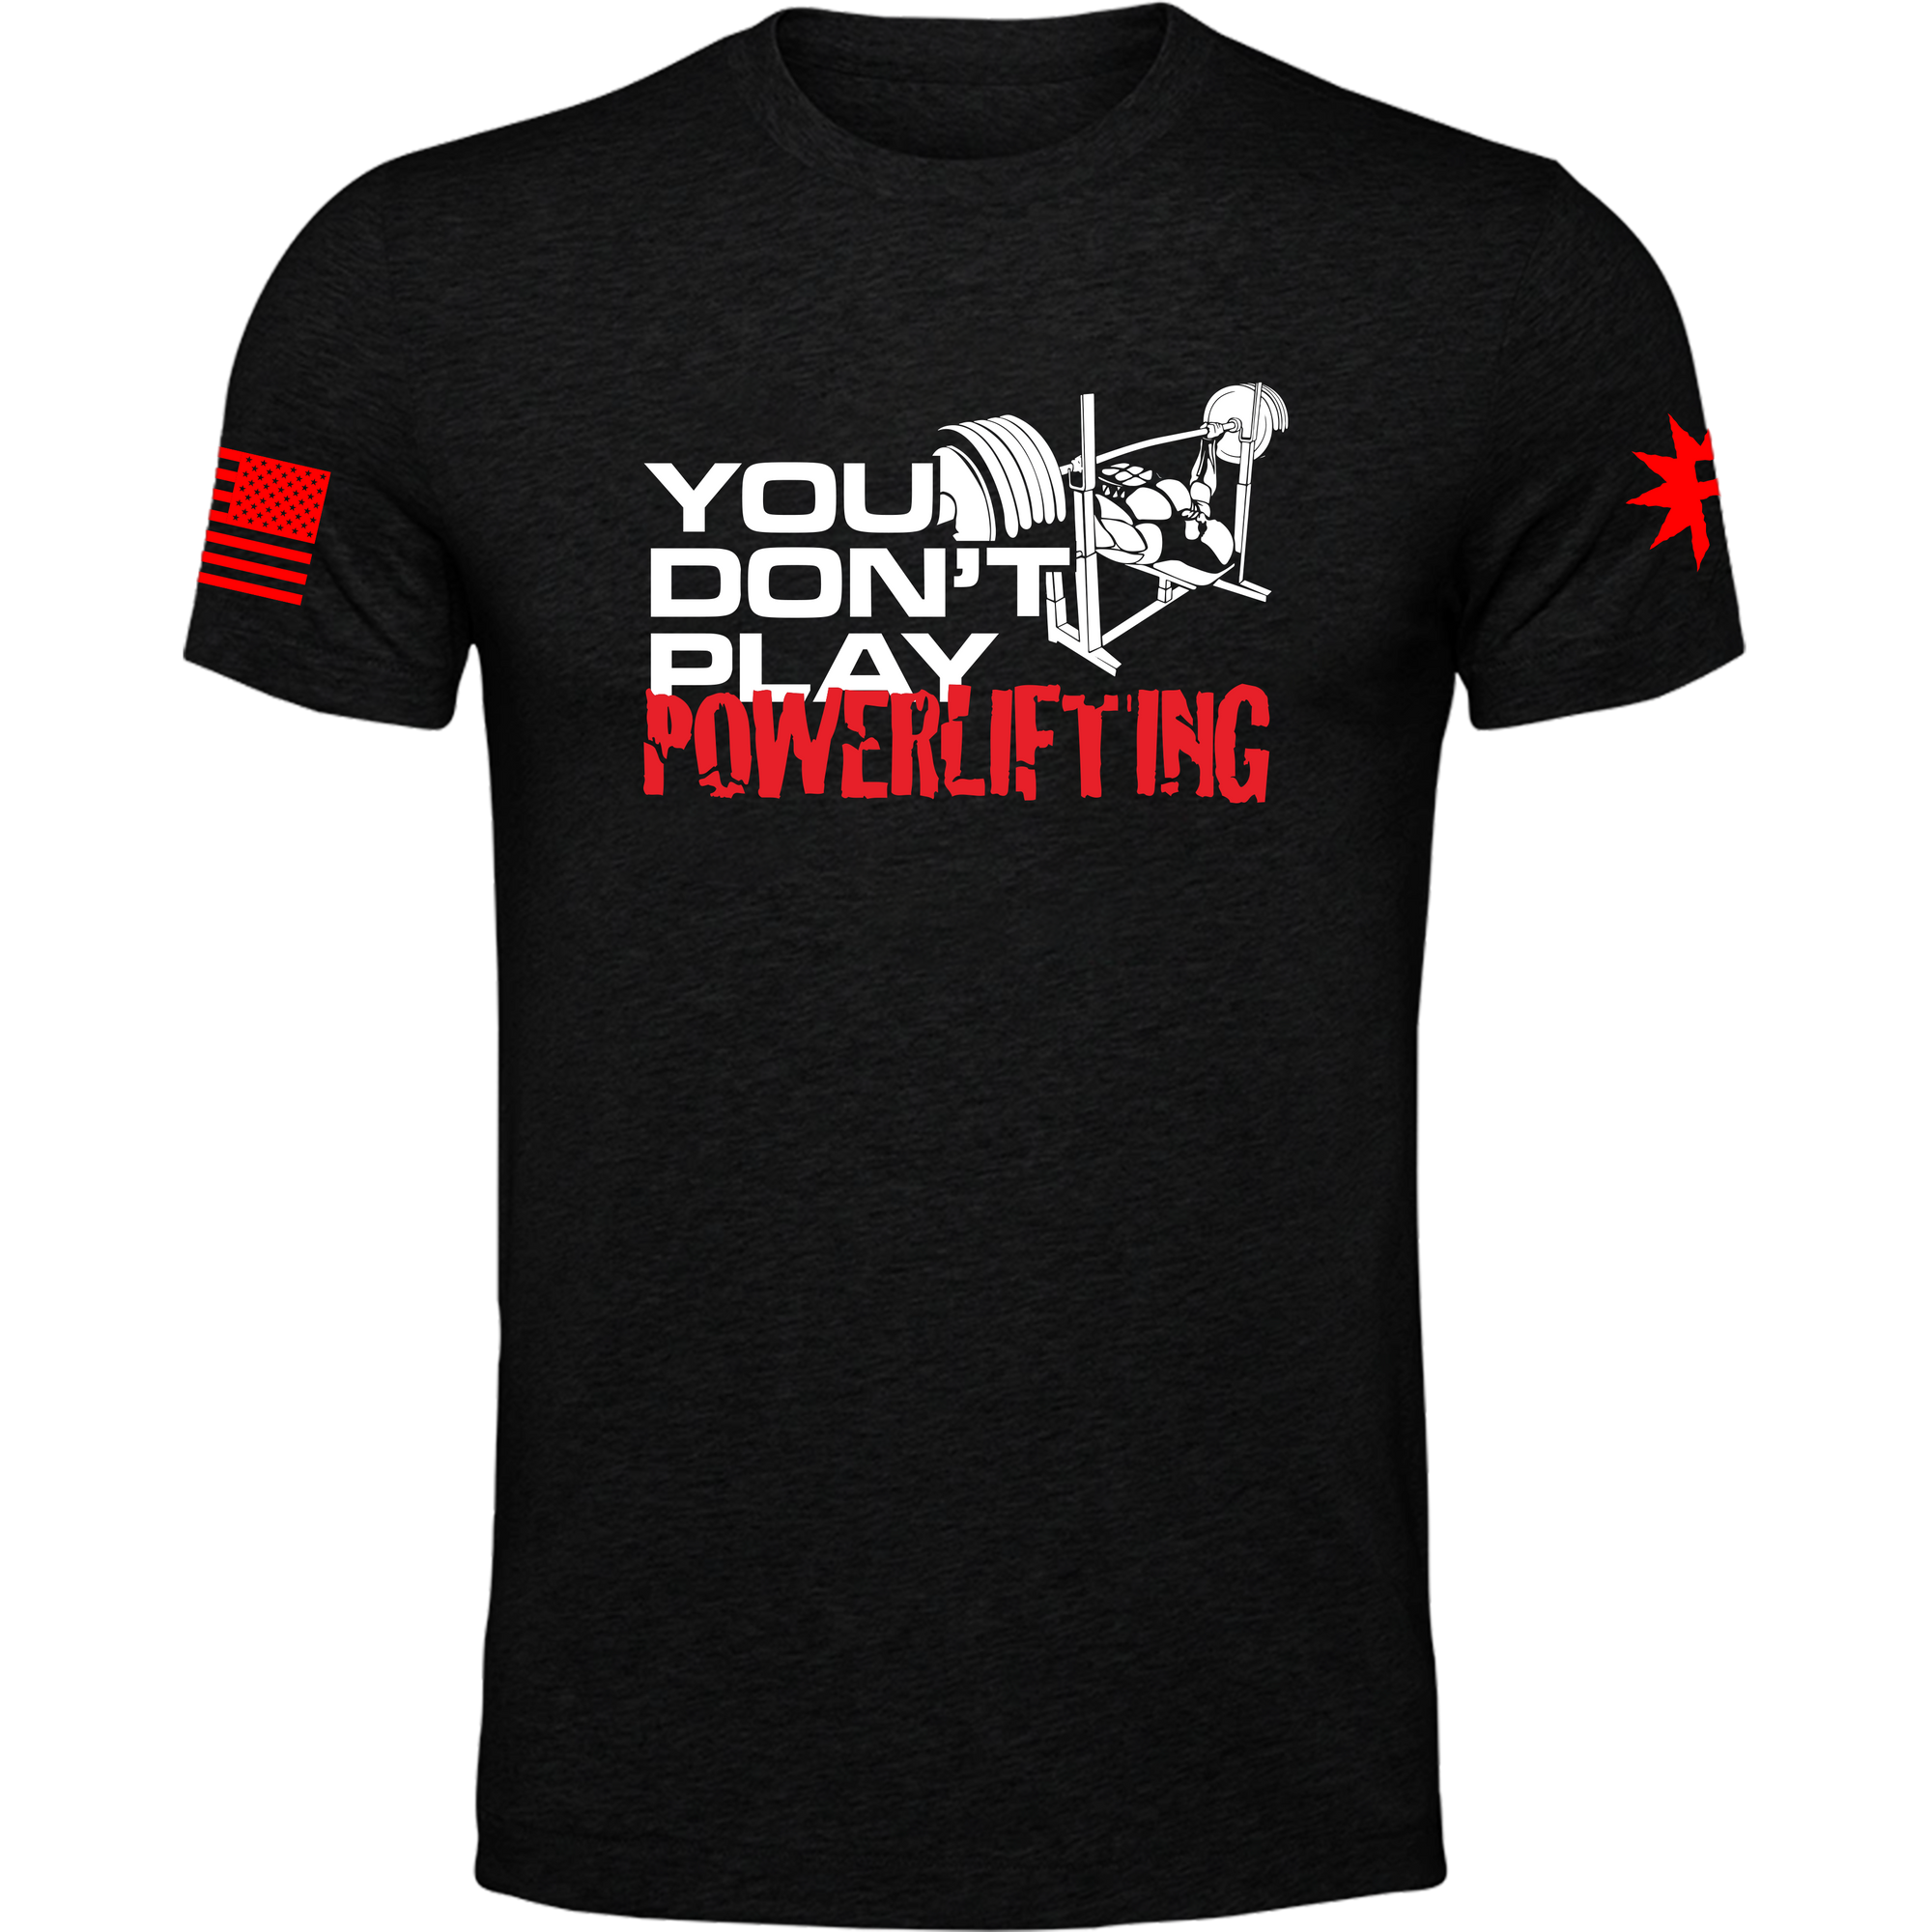 You Don't Play Powerlifting Tee